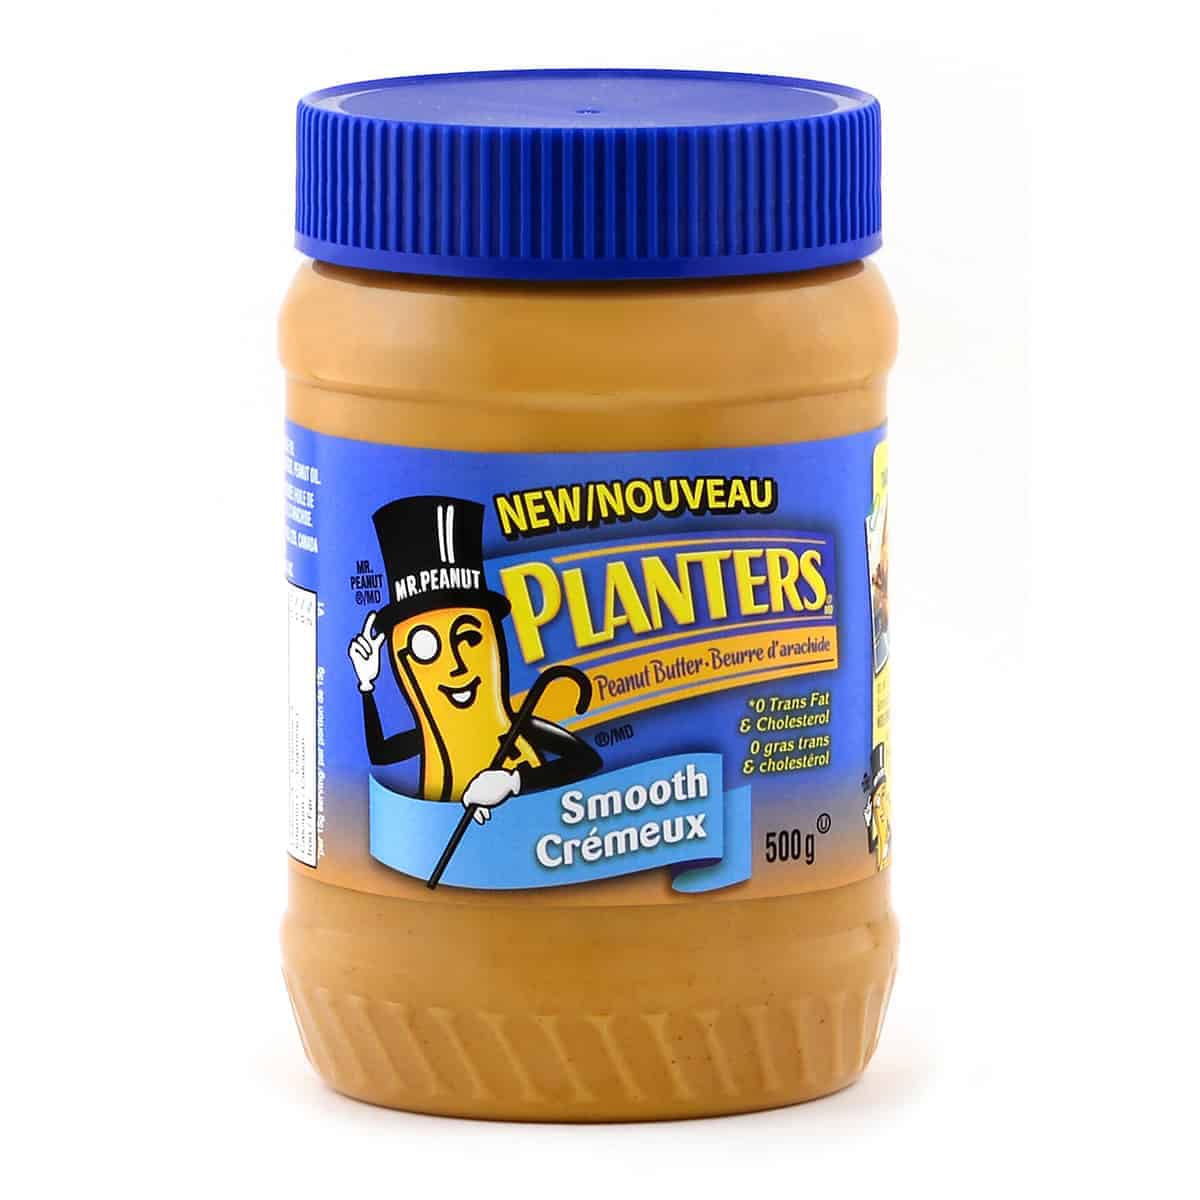 A Mixture Of Peanut Butter Smooth Peanut Butter Planters Canada.